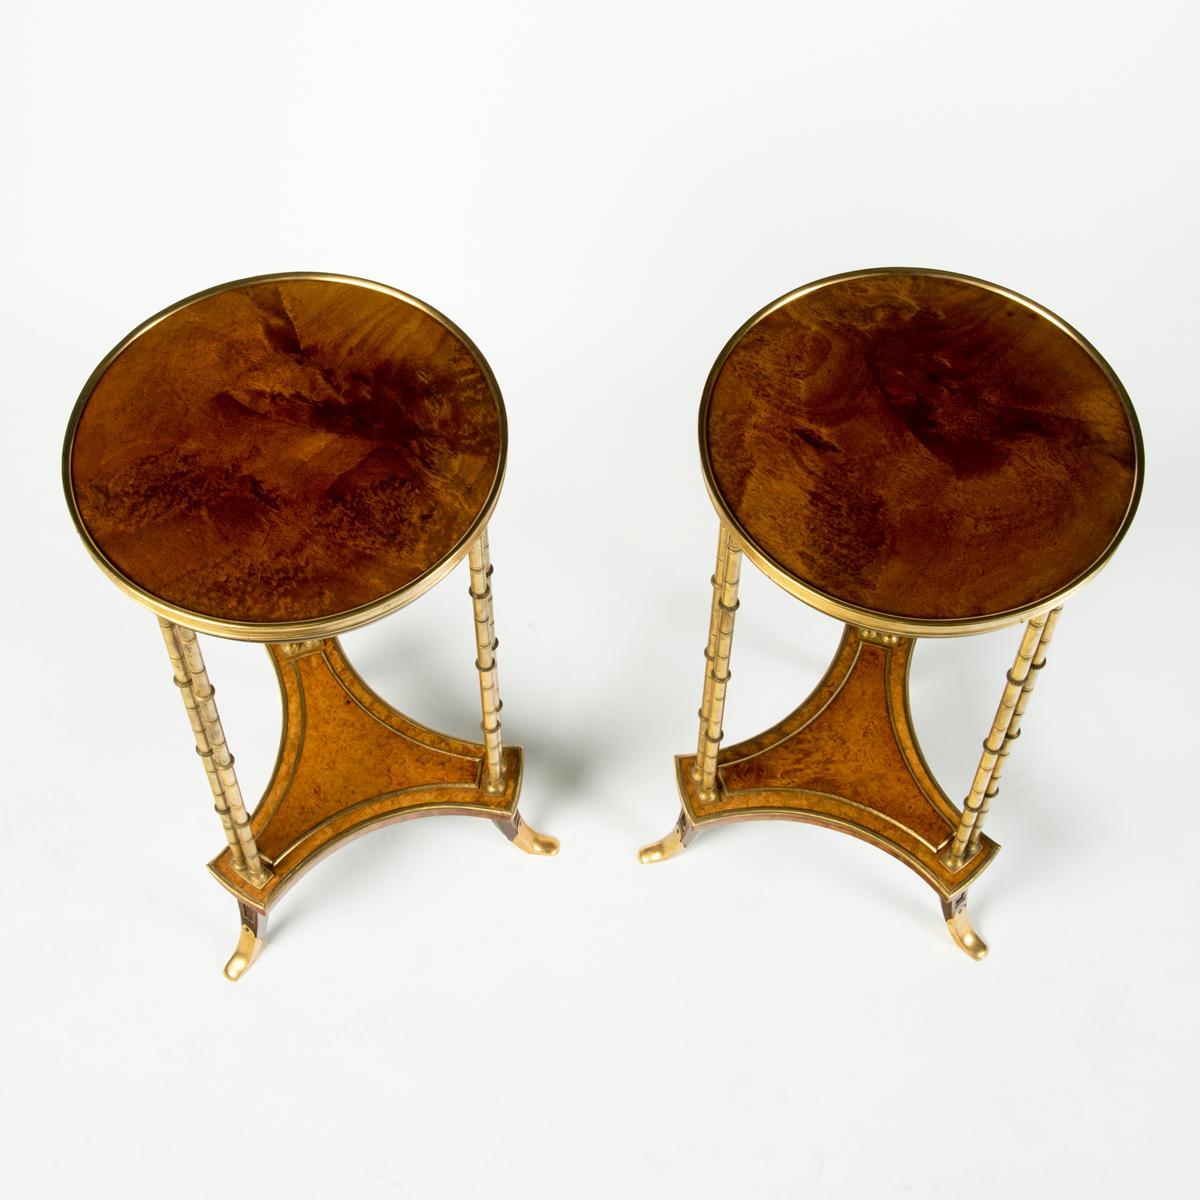 A pair of Louis XVI style mahogany and ormolu gueridons, after Adam Weisweiler In Good Condition For Sale In Lymington, Hampshire